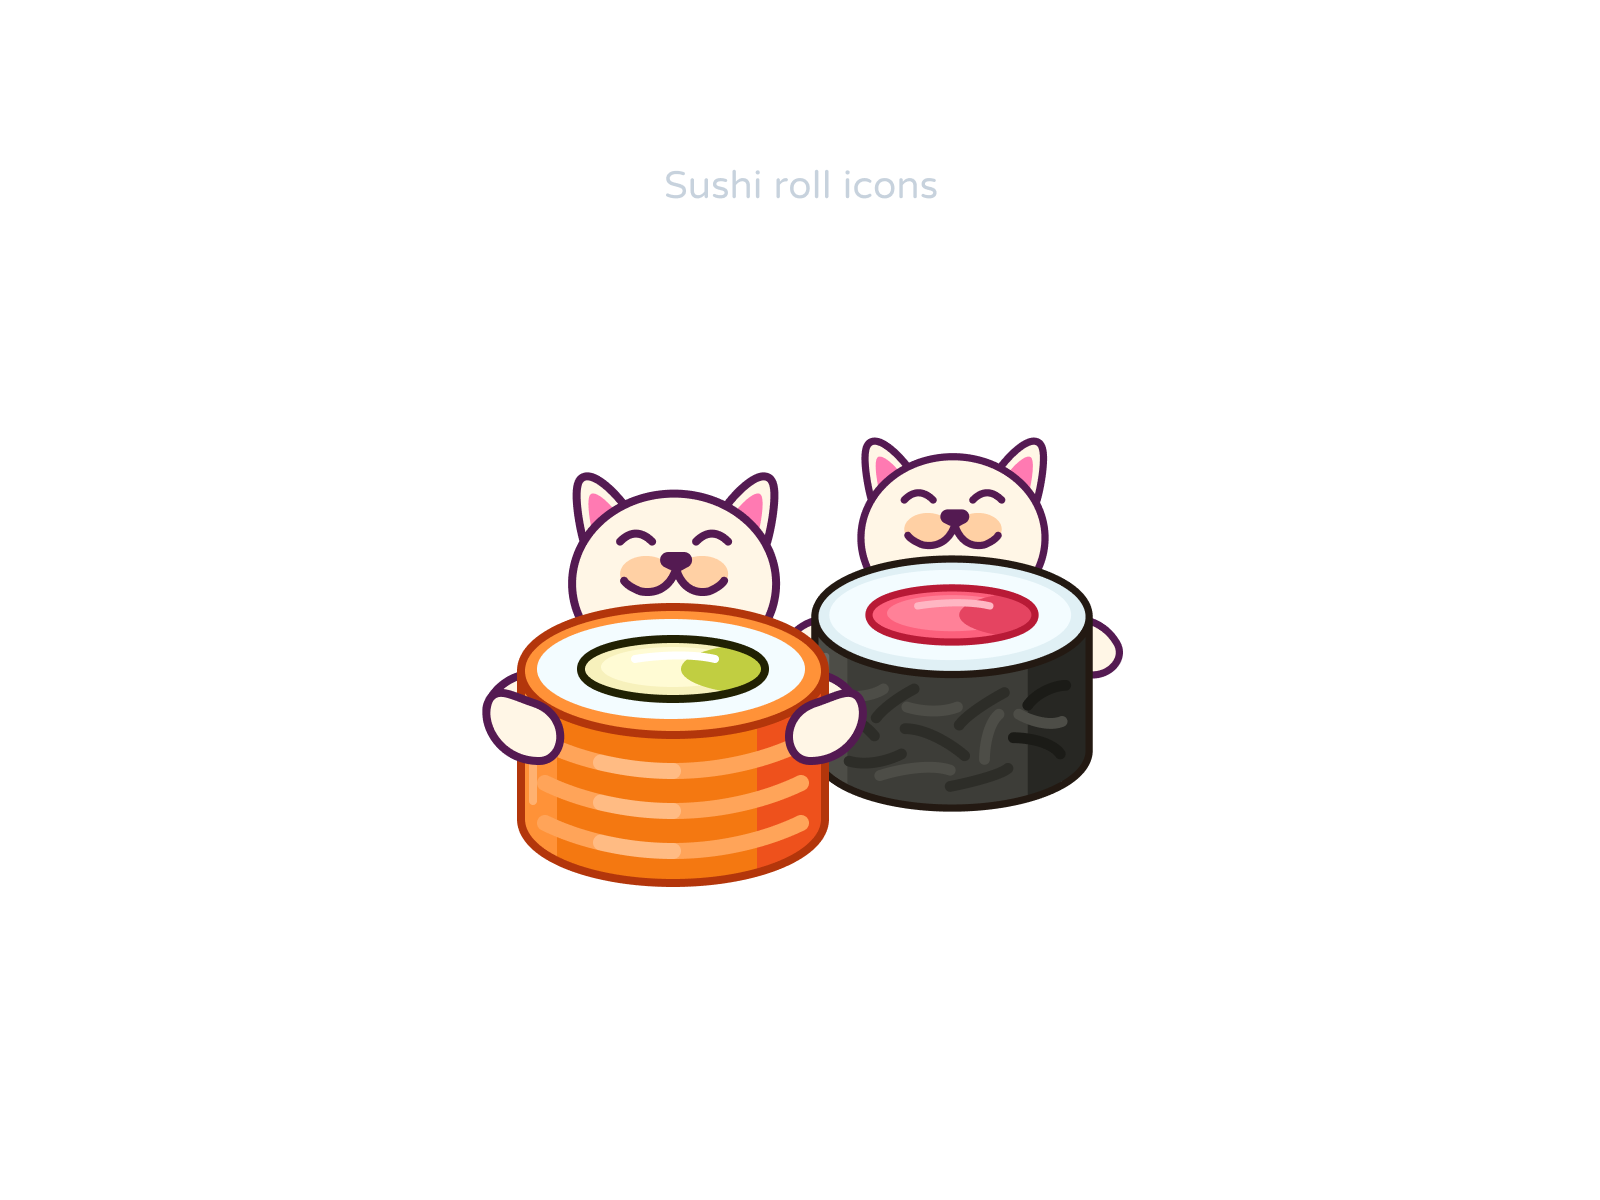 Sushi roll icons by Rengised on Dribbble